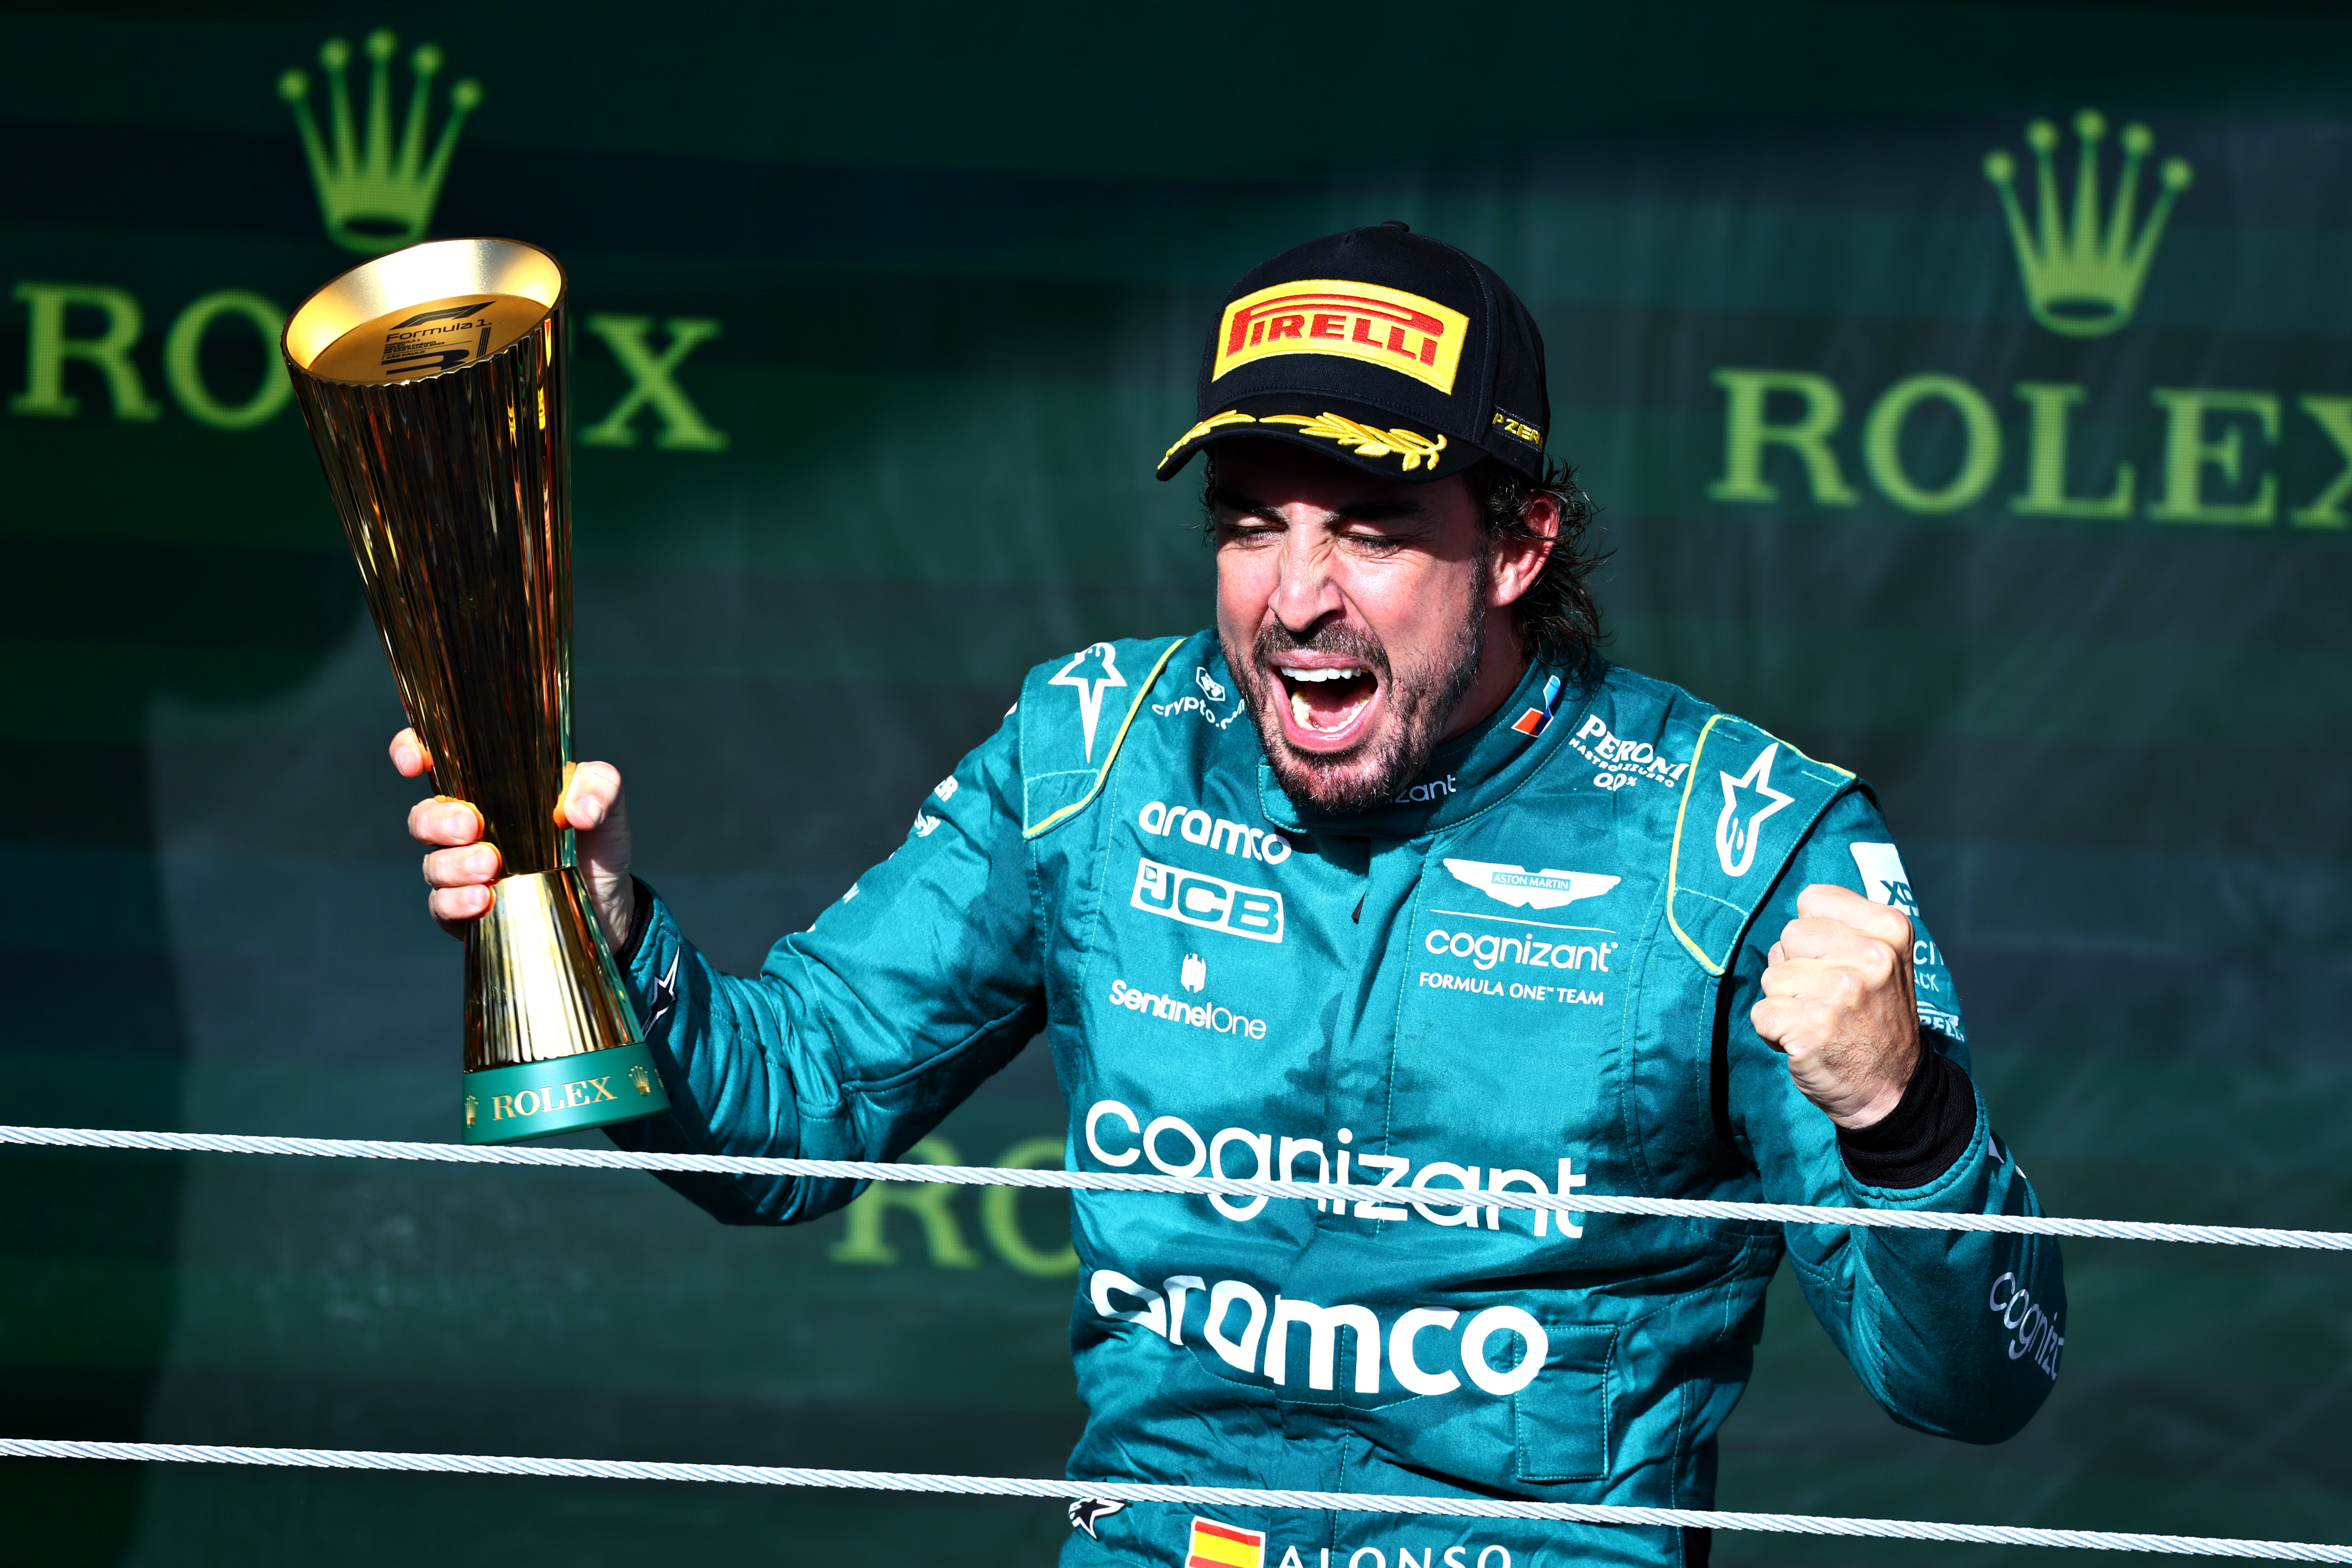 Fernando Alonso, at 42, was an inspired signing for an Aston Martin car reborn